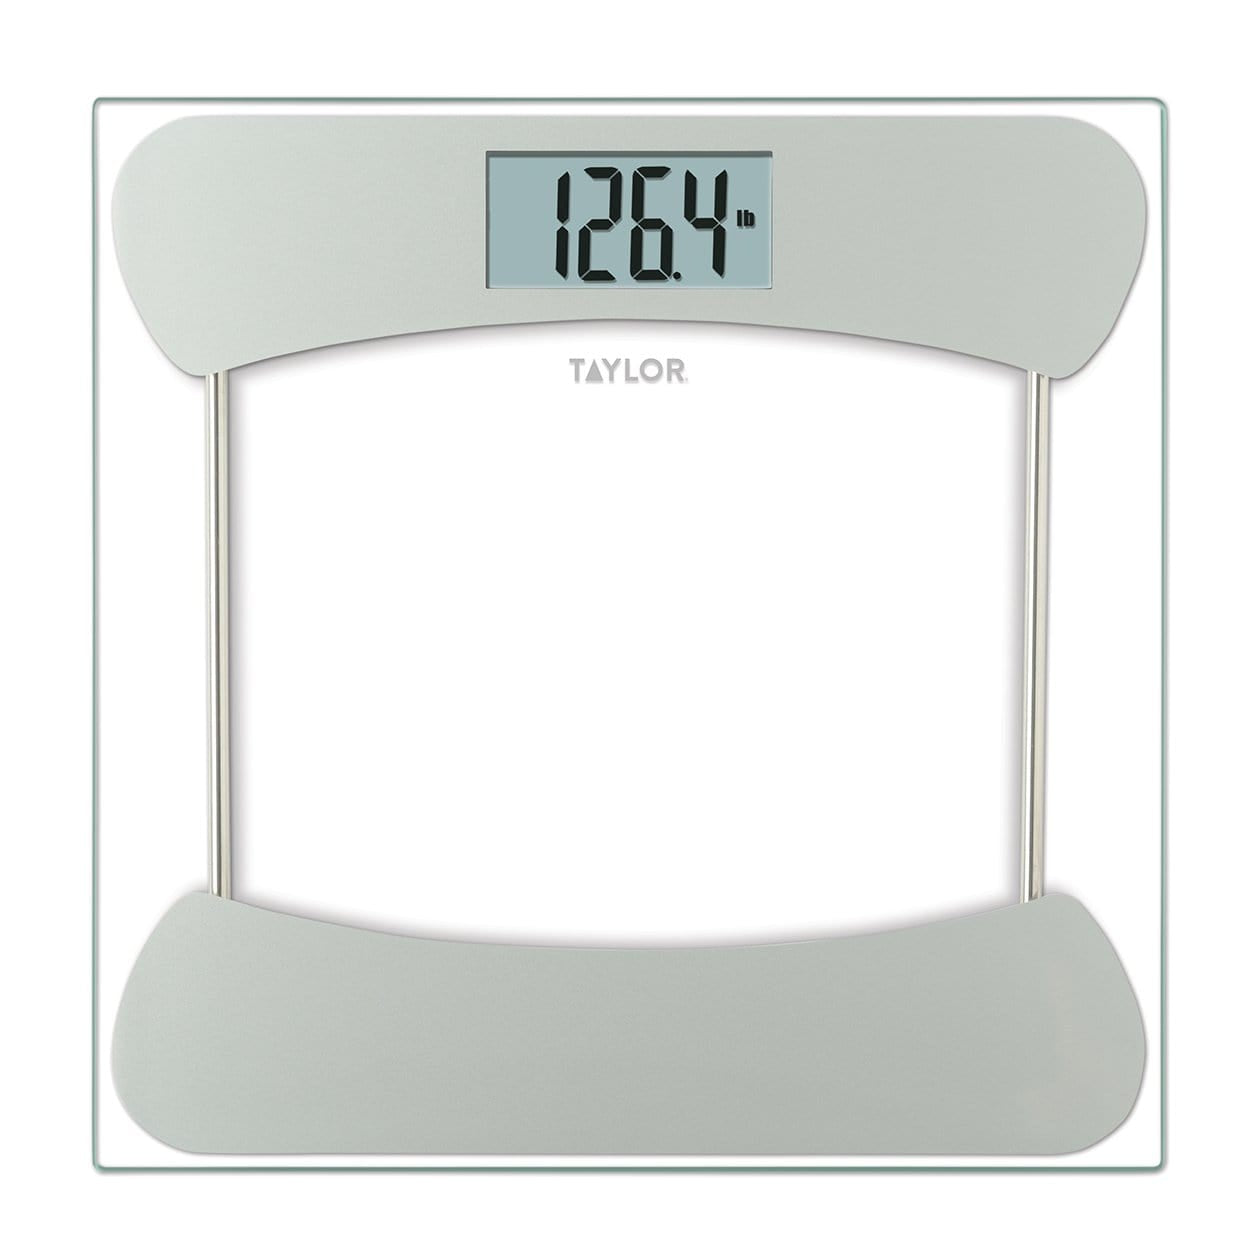 Taylor Digital Glass Bathroom Scale with Stainless Steel